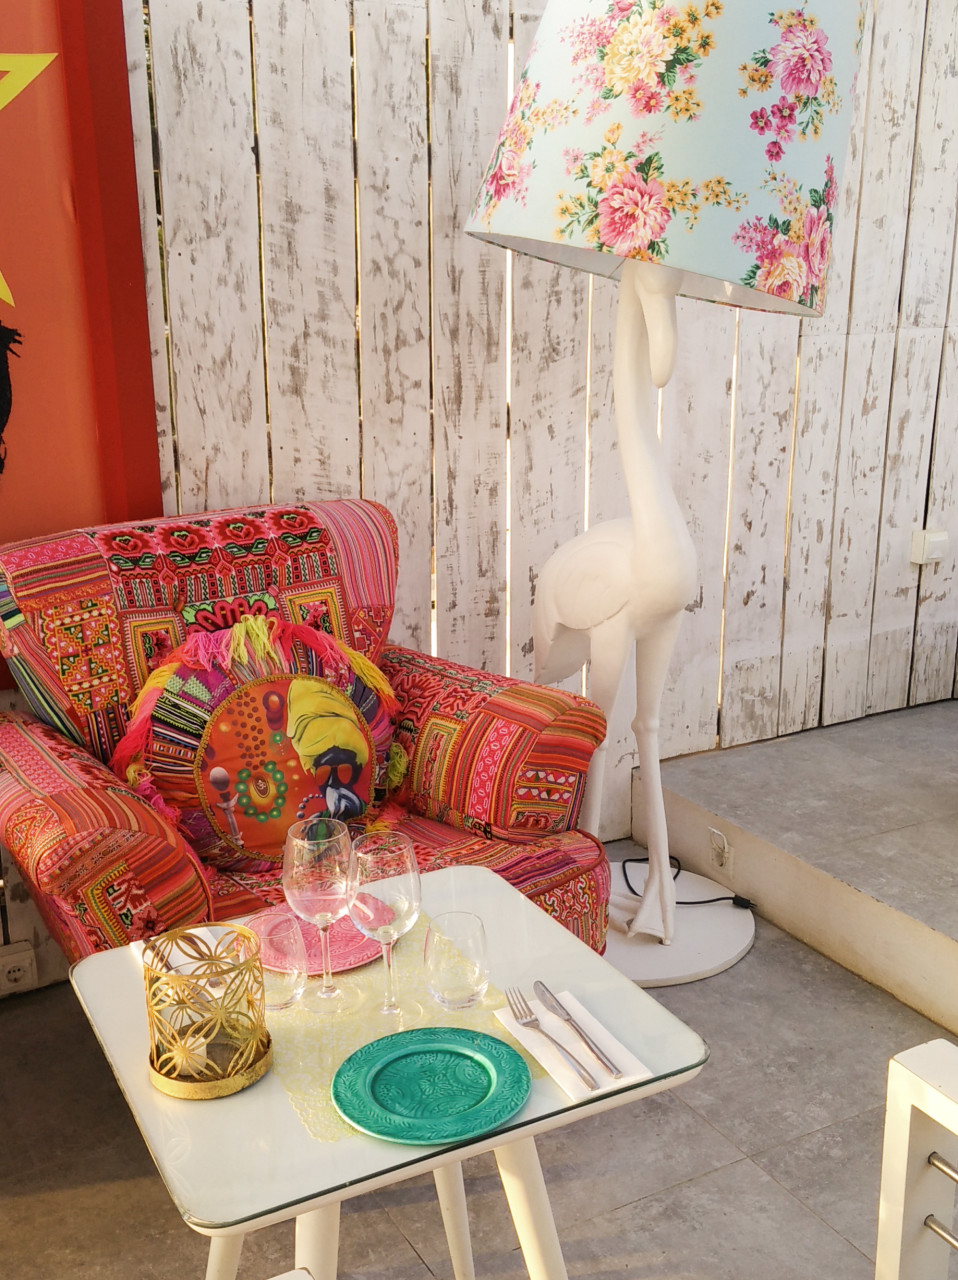 armchair next to a flamingo floor standing lamp with a floral shade